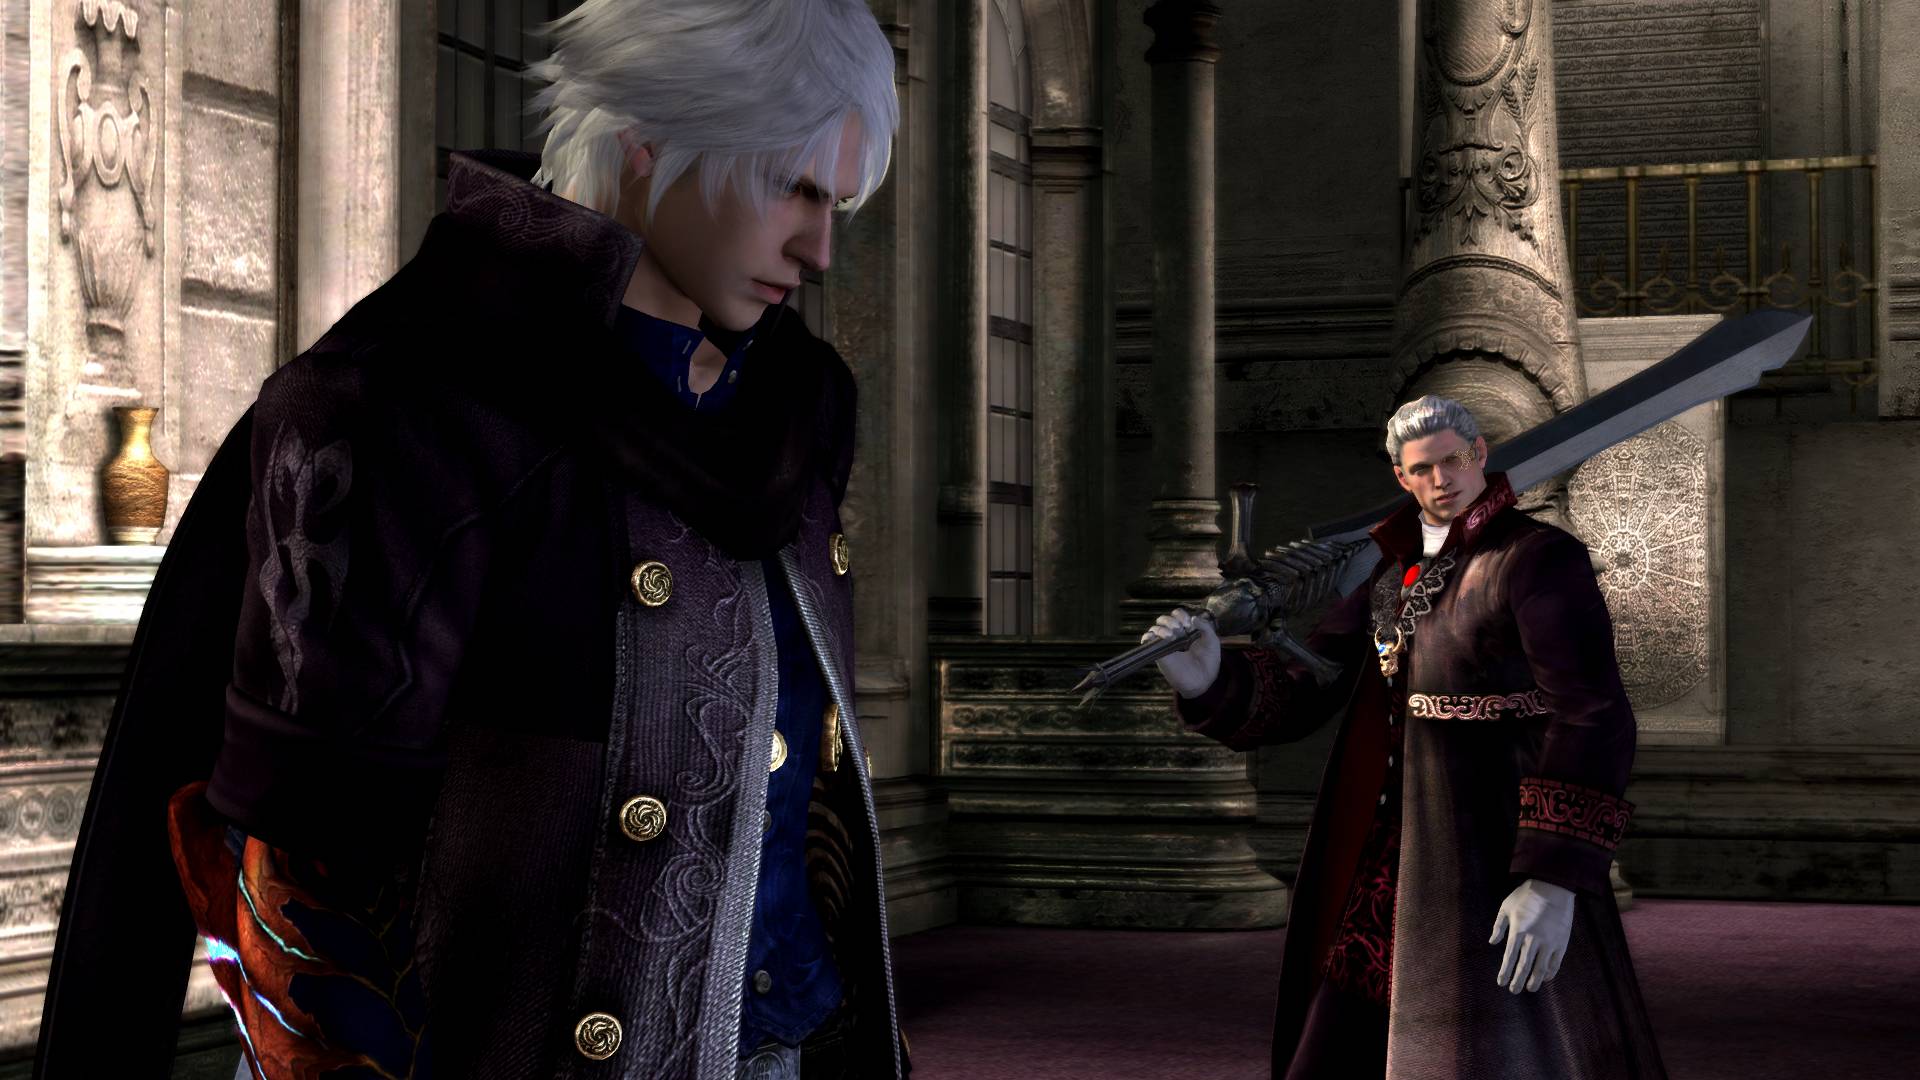 New Devil May Cry preview